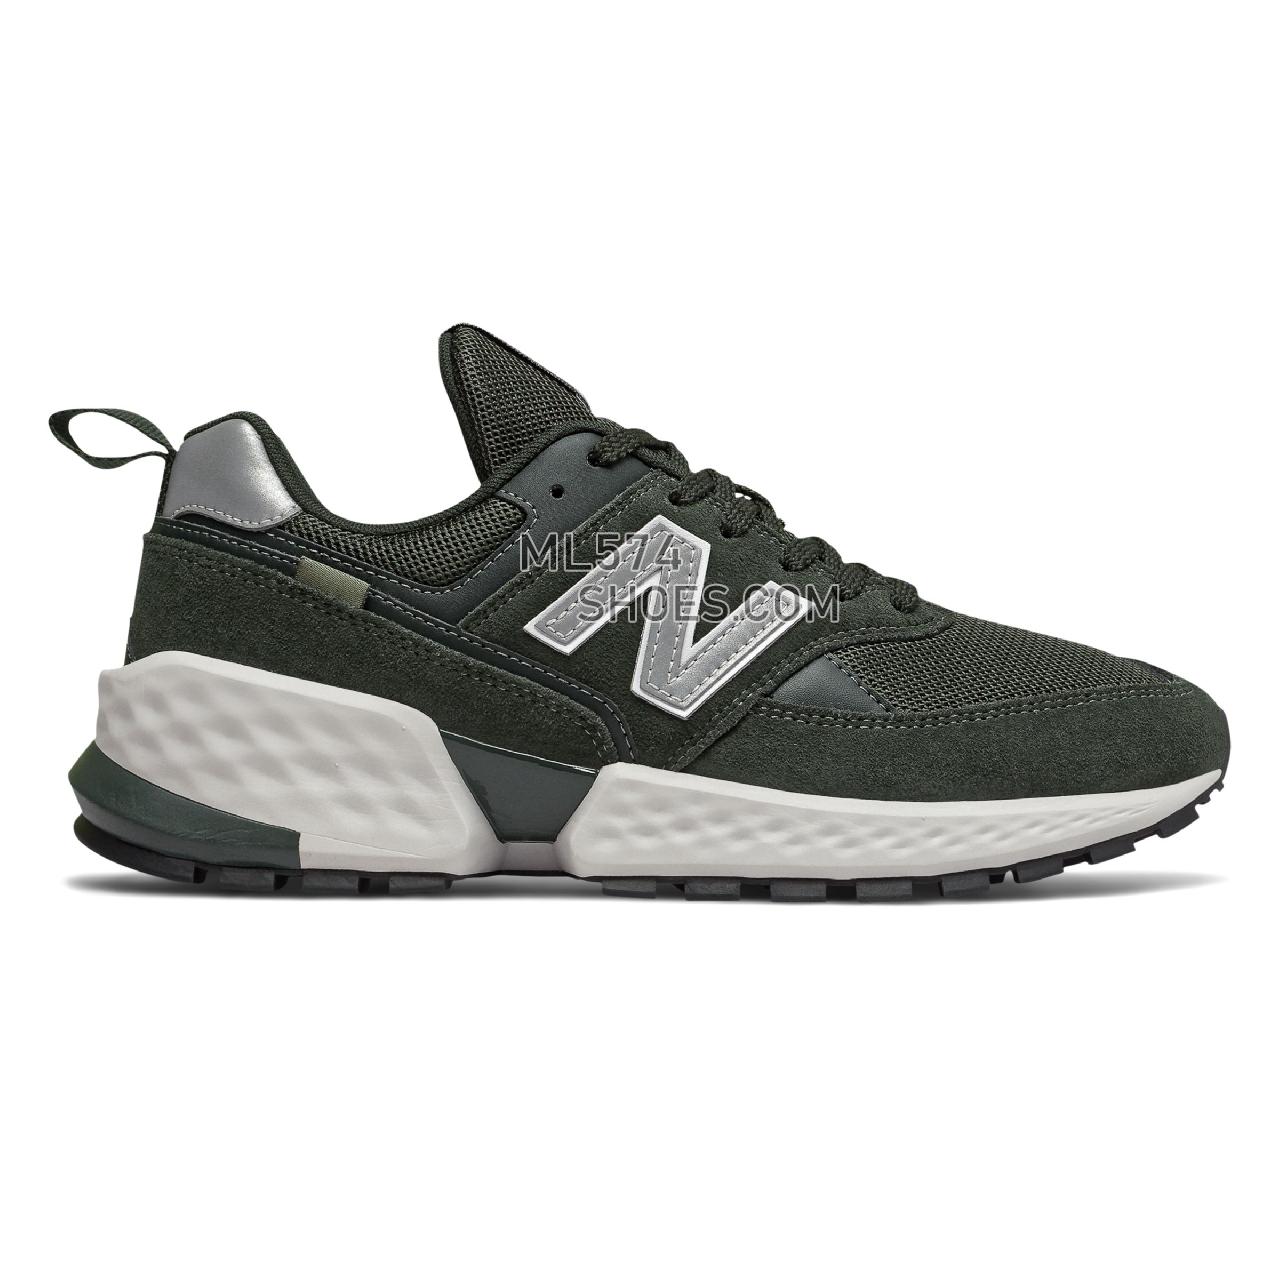 New Balance 574 Sport - Men's Sport Style Sneakers - Rifle Green with Silver Metallic - MS574ACM